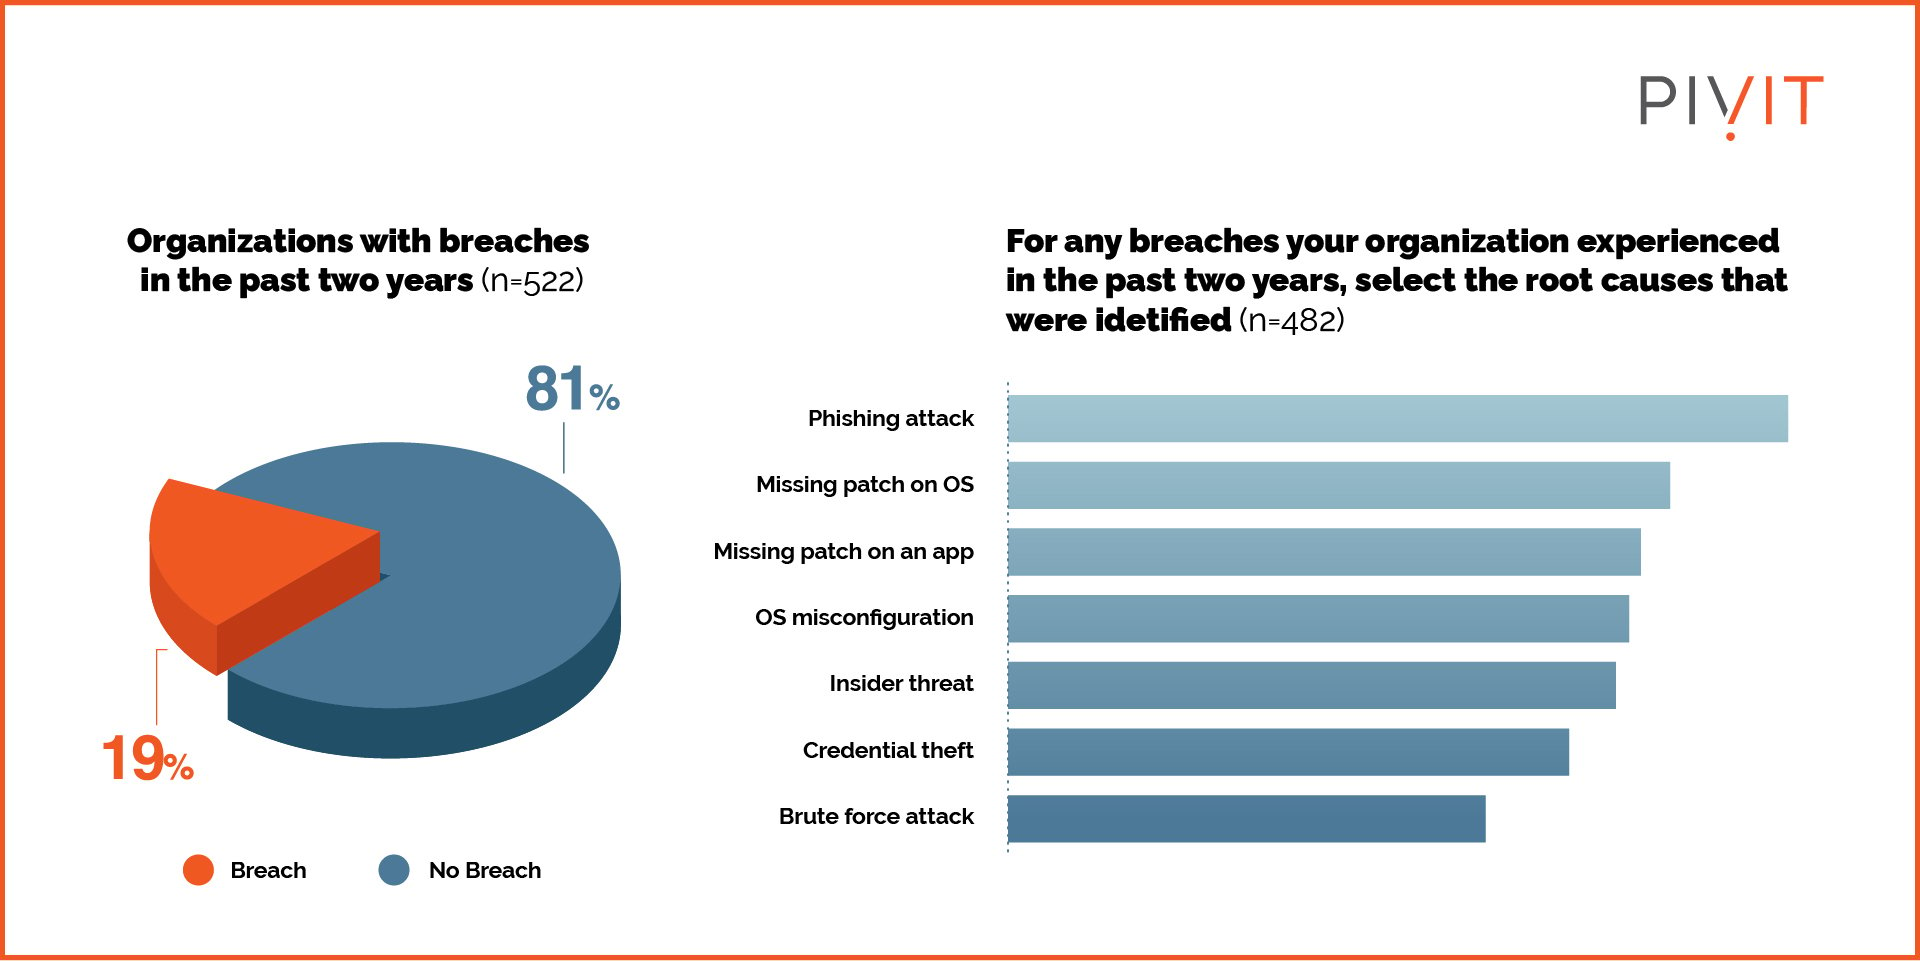 Organizations with breaches in the past two years